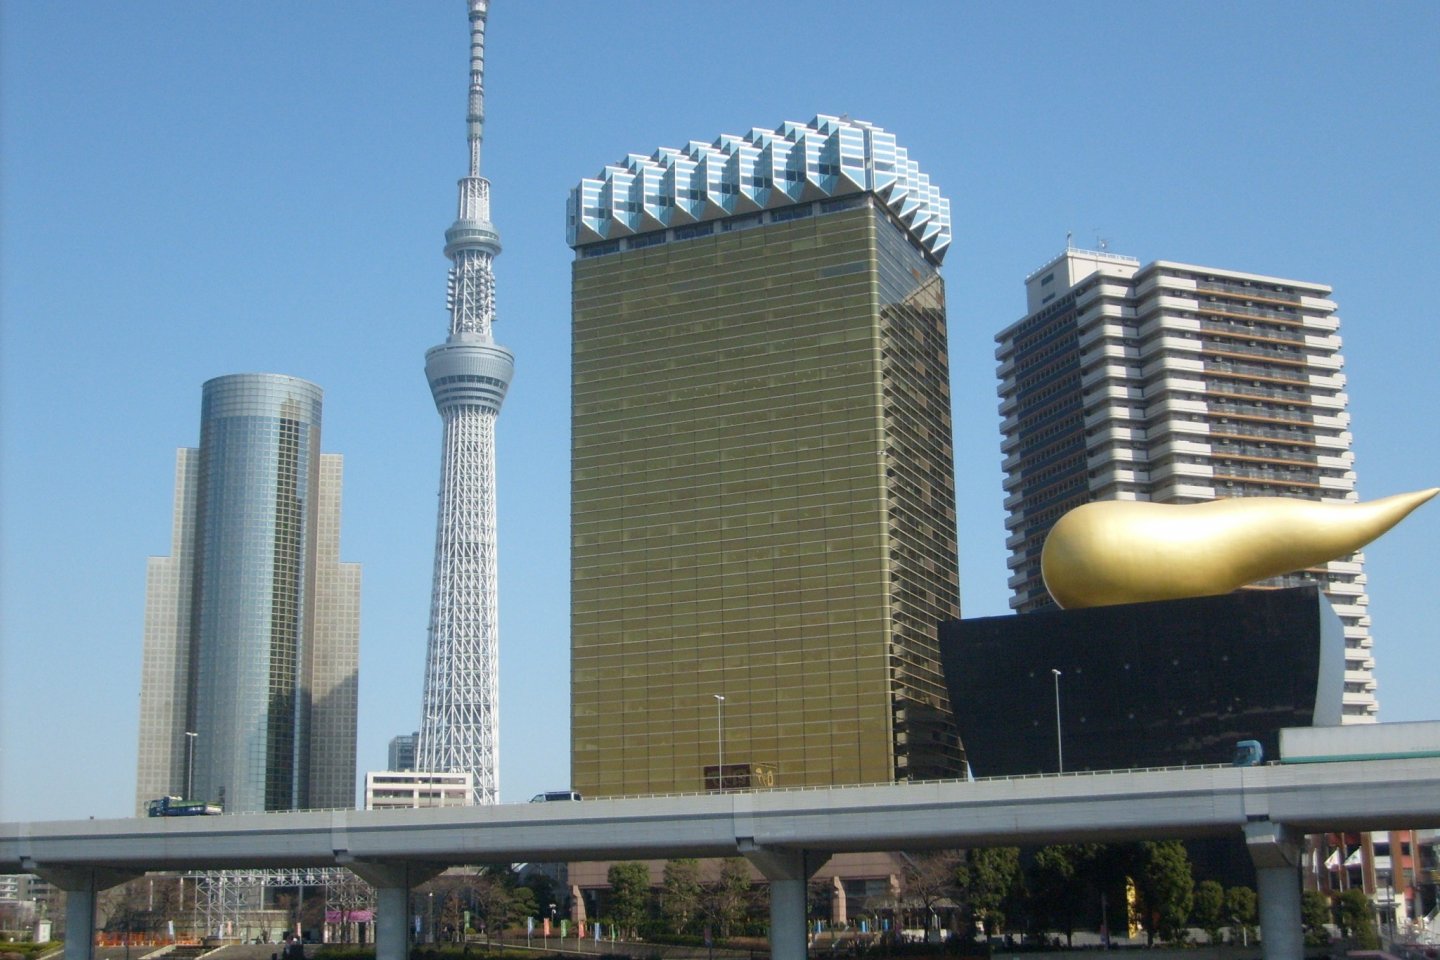 A view of the Skytree and Asahi Building from the bridge by the hotel